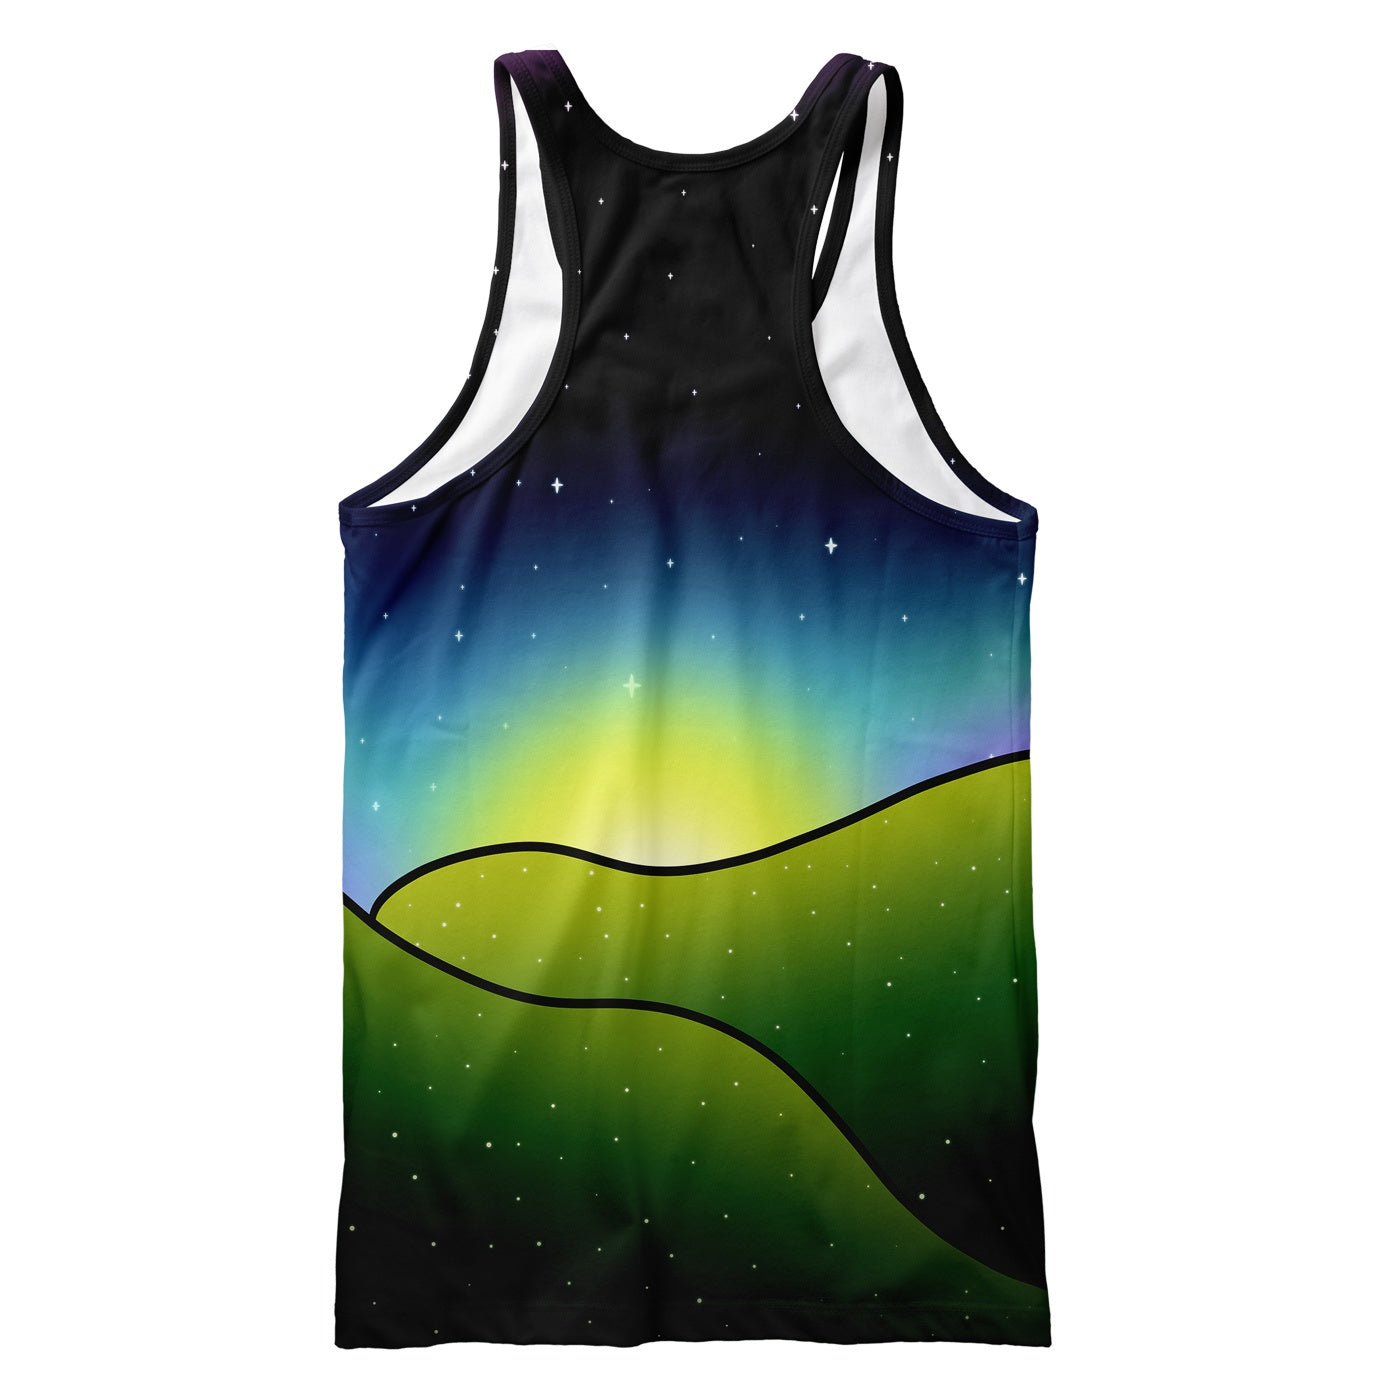 Psychedelic Dream Tank Top